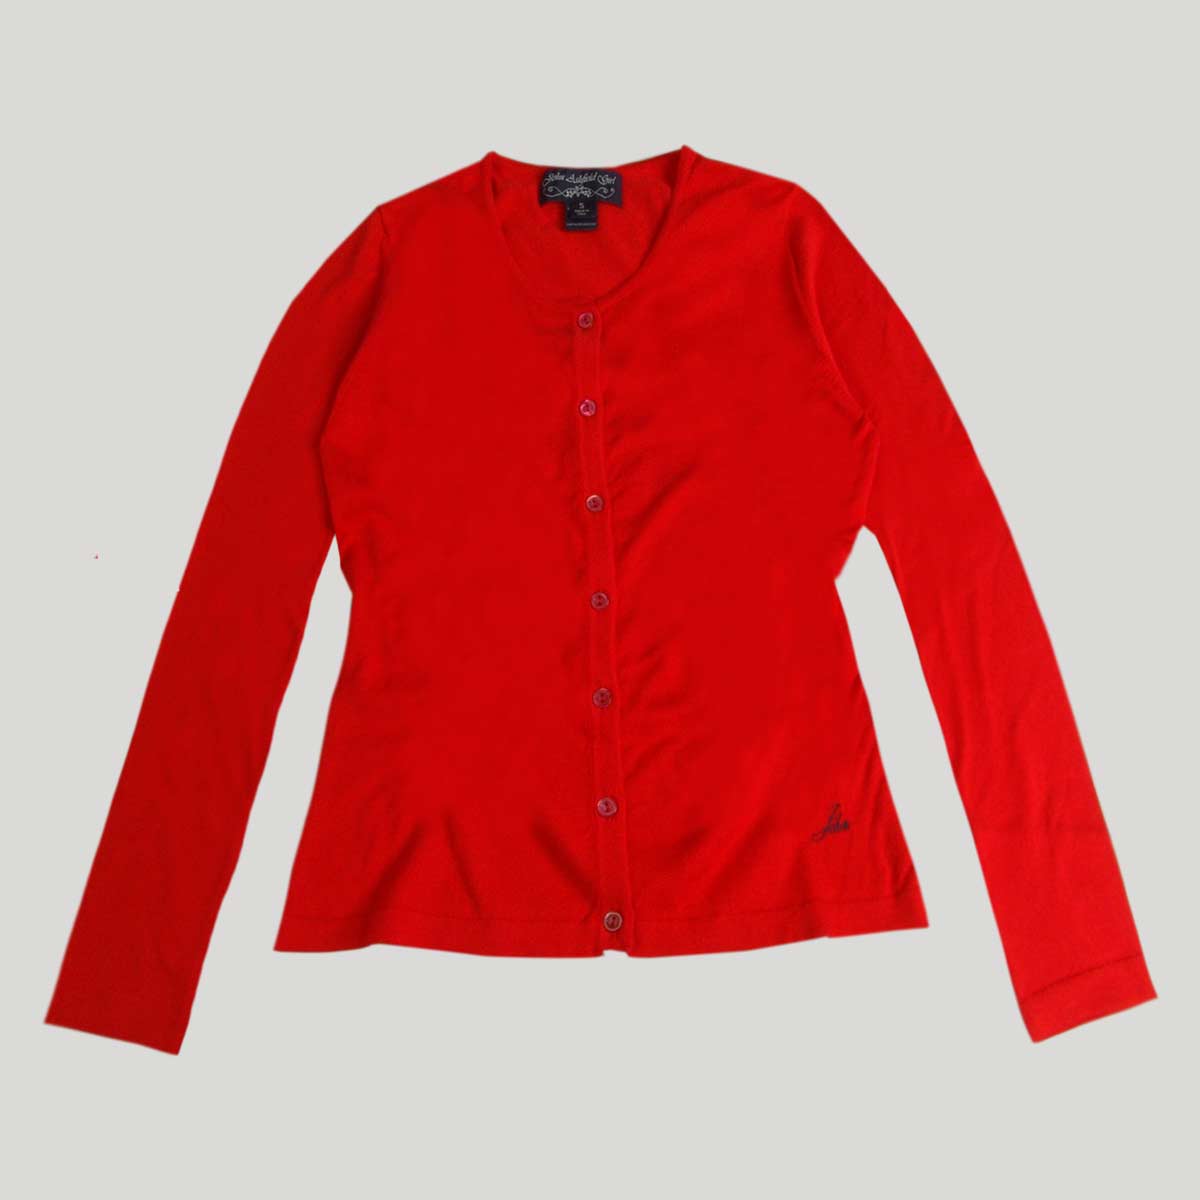 Buttoned Cardigan for Woman